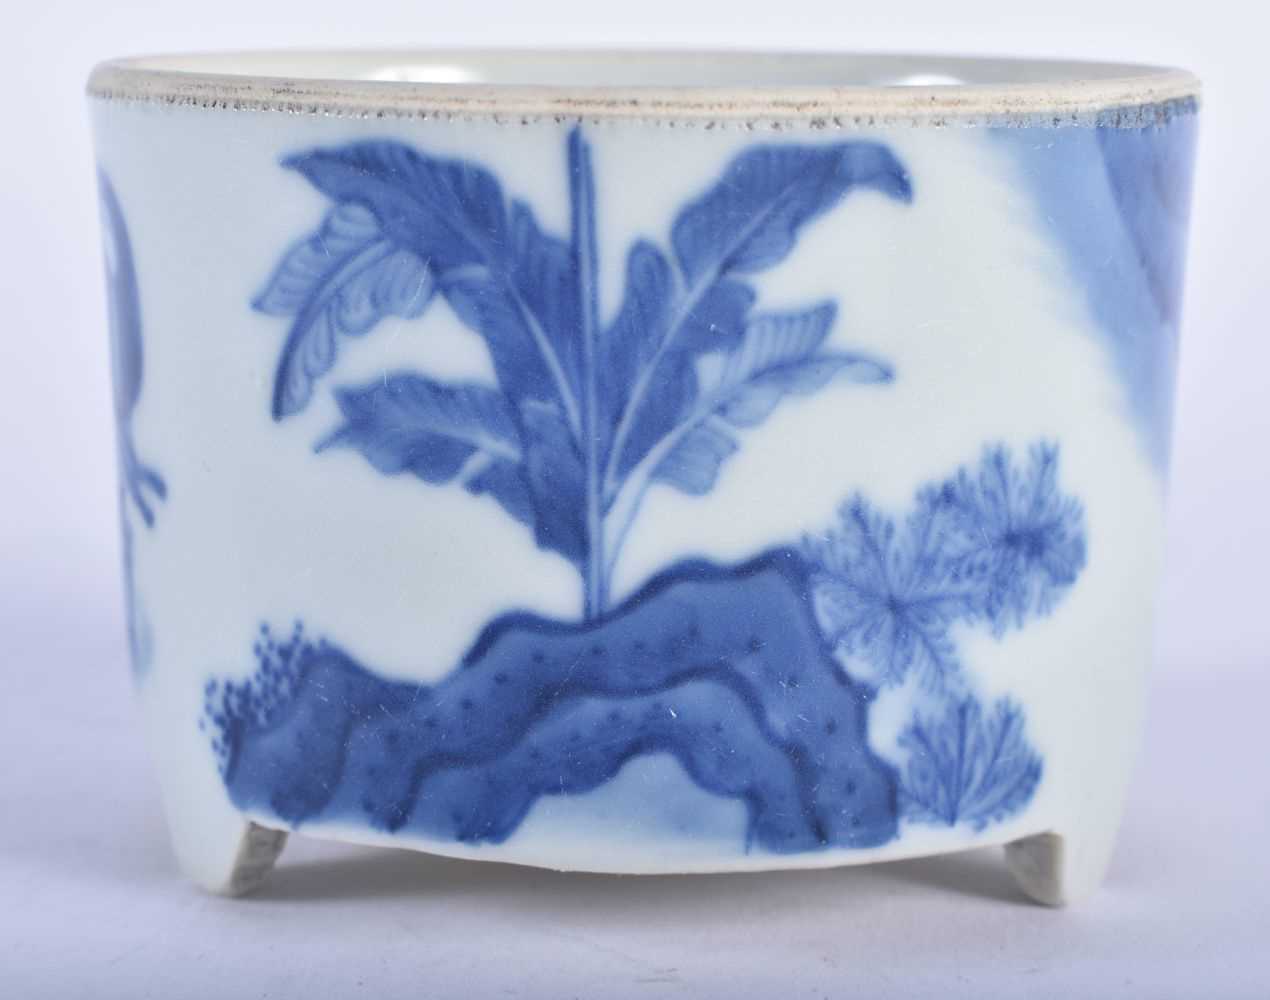 A CHINESE QING DYNASTY BLUE AND WHITE PORCELAIN CENSER painted with figures in landscapes. 8.5 cm - Image 3 of 11